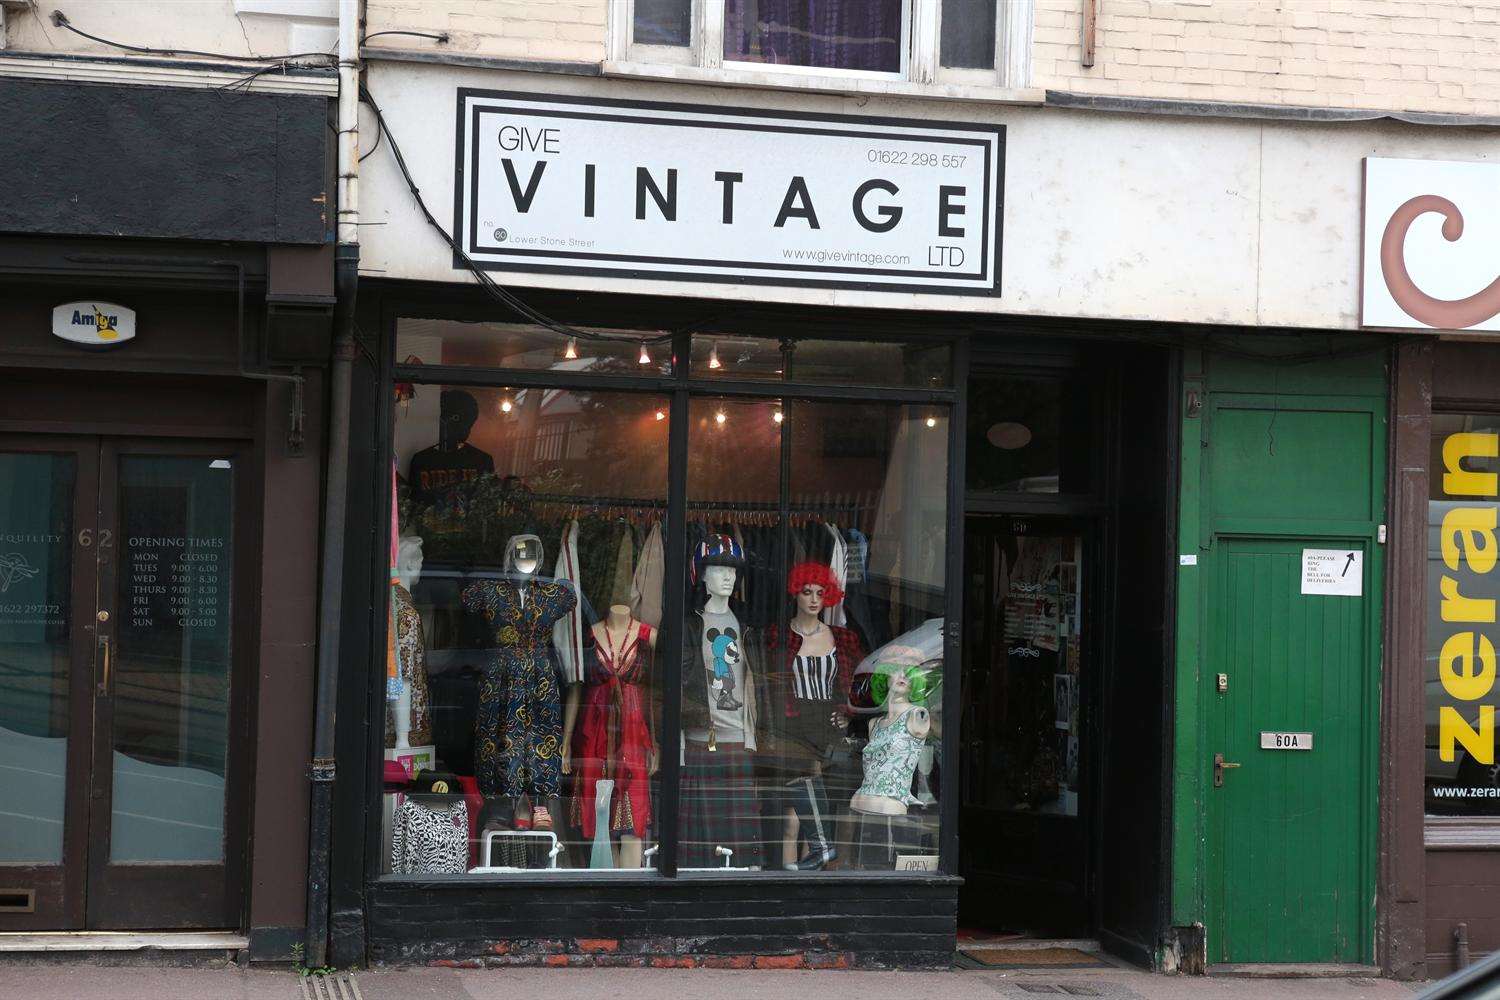 Give Vintage which is giving people with mental health issues the chance to get back into work and using any profit for charitable ventures